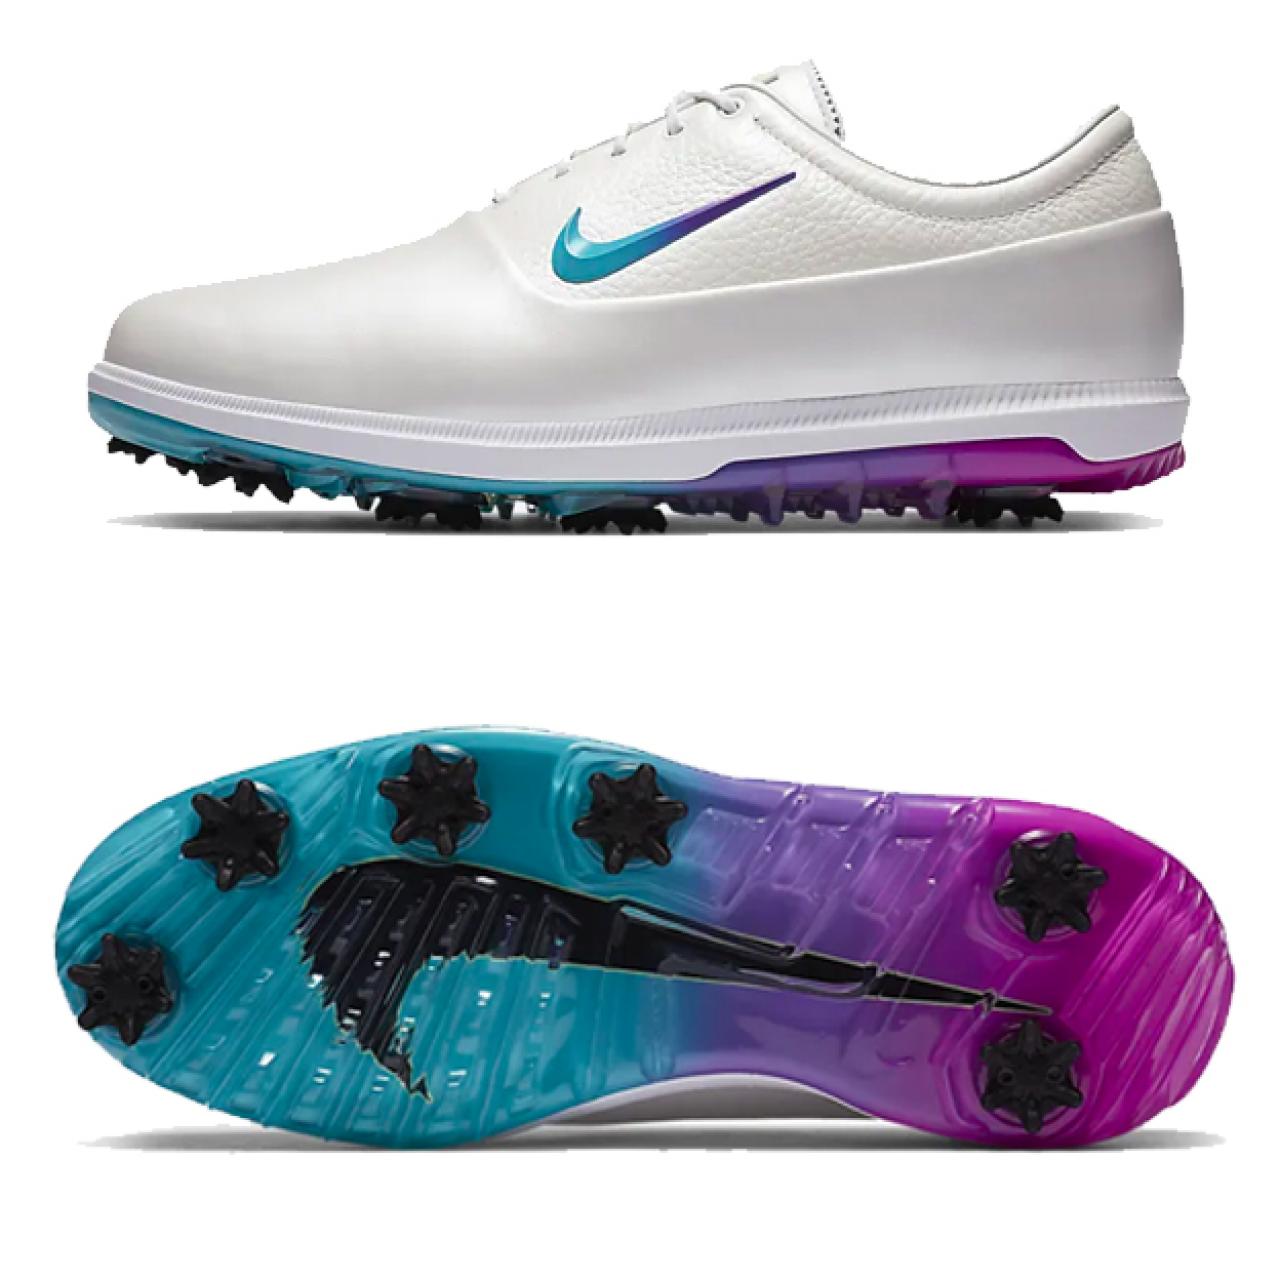 Nike releases three limited-edition NRG golf shoes with bold pops 